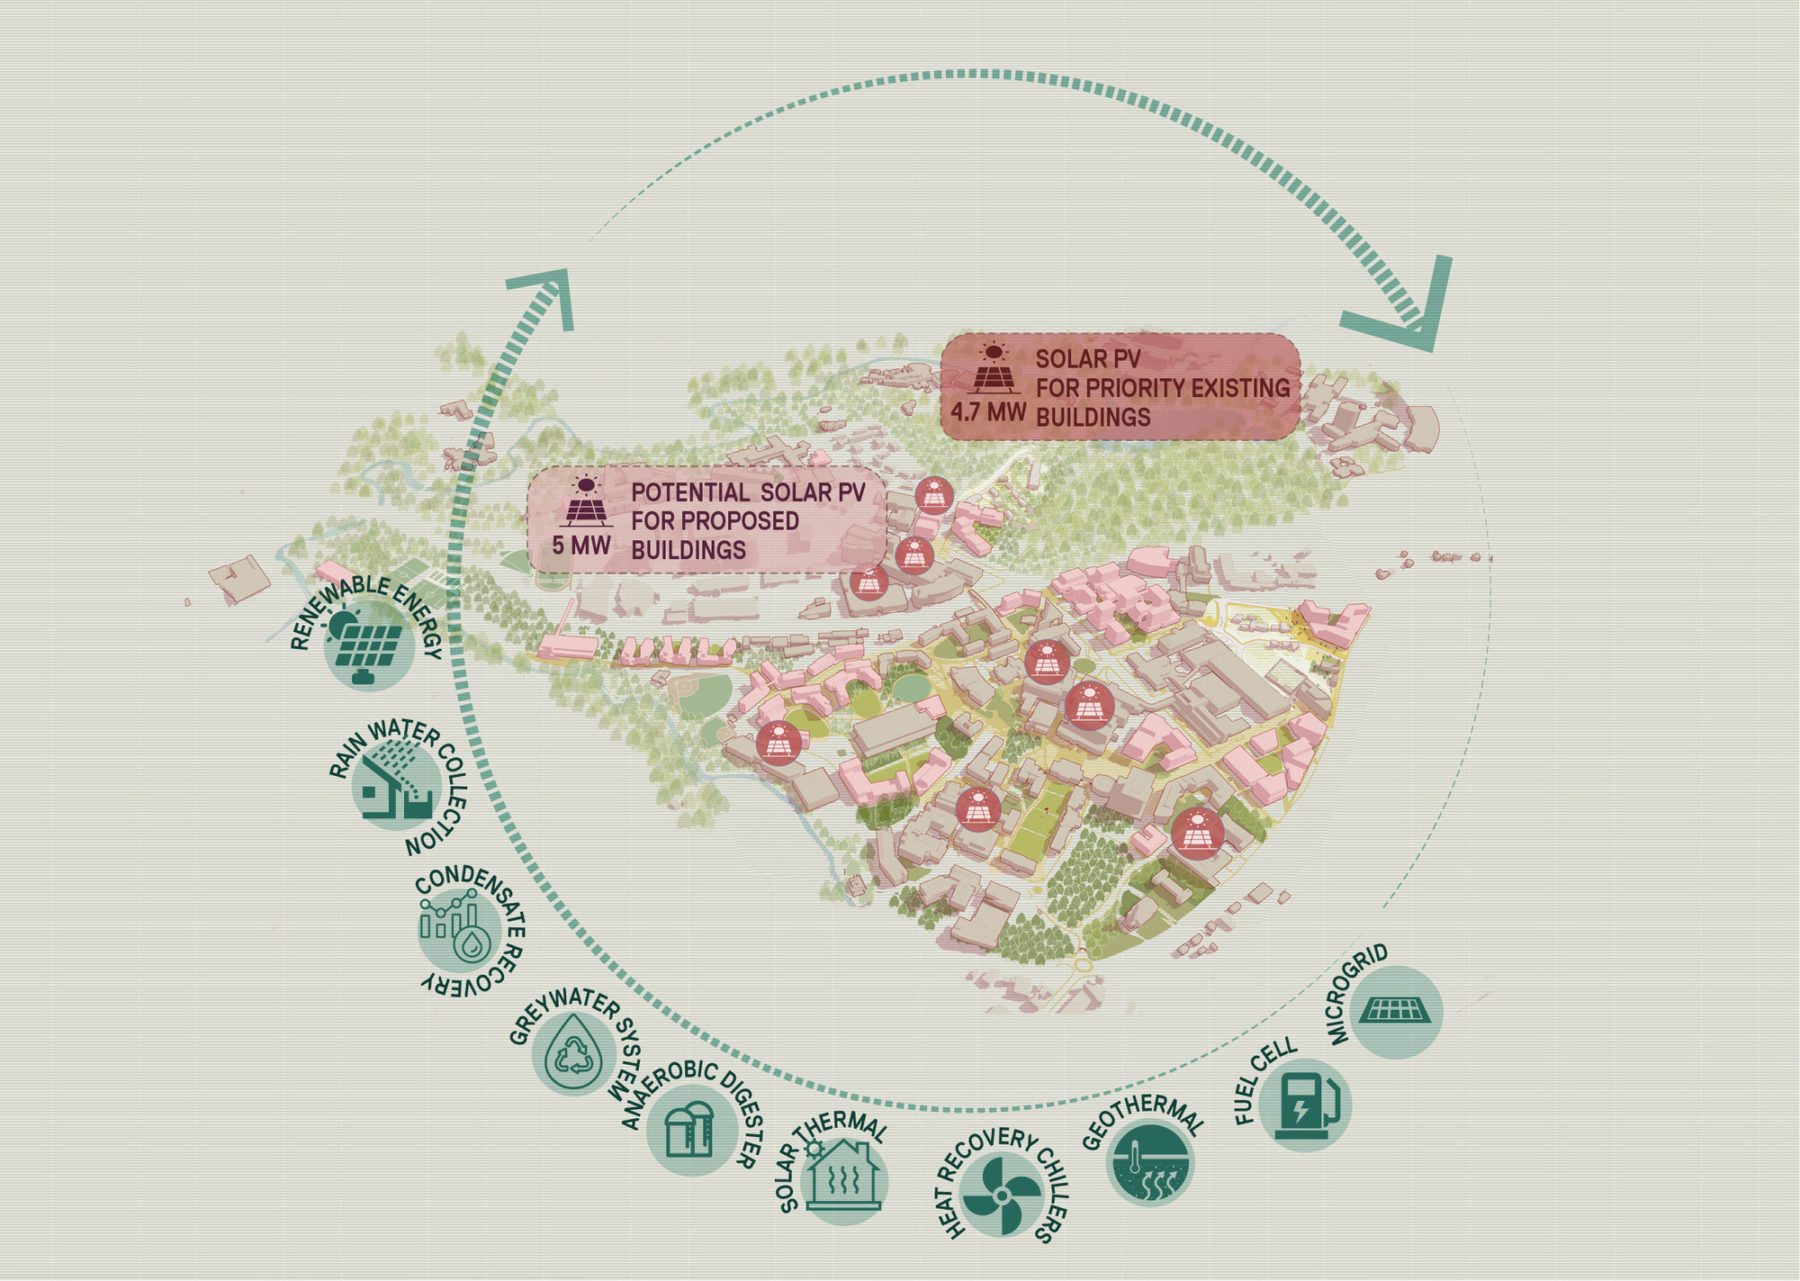 diagram highlighting sustainable features of the plan